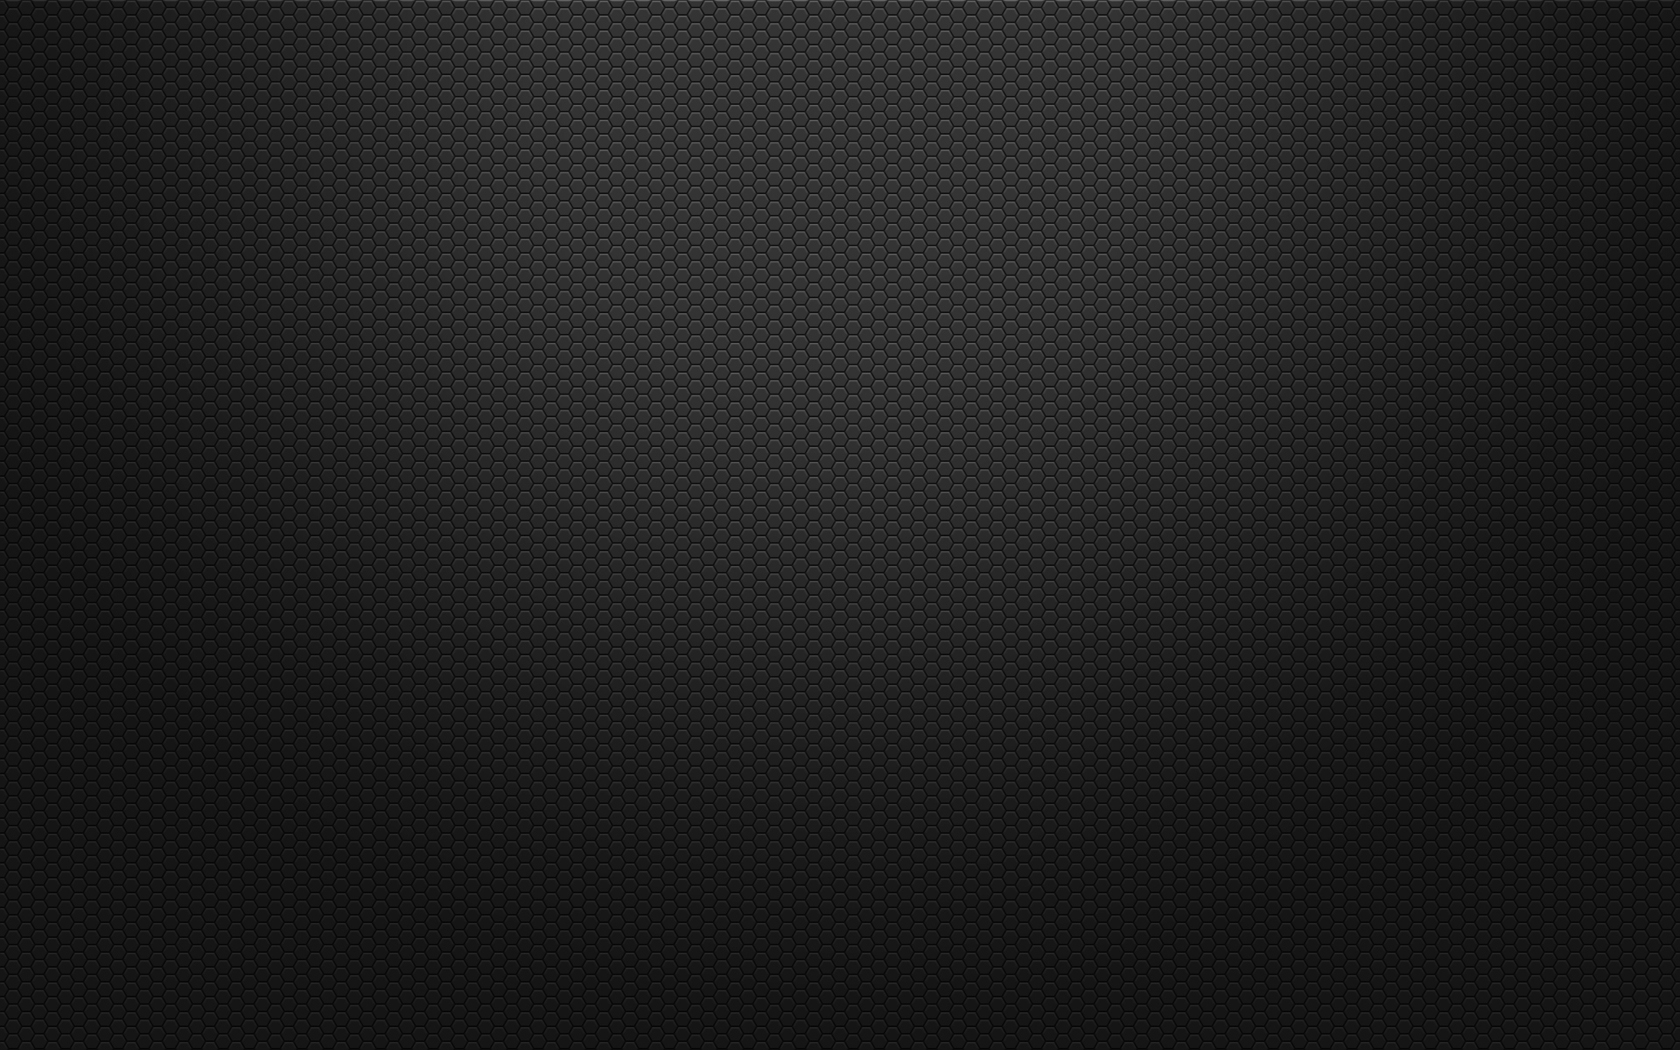 HD Simple Wallpaper Arena Black Background And Some